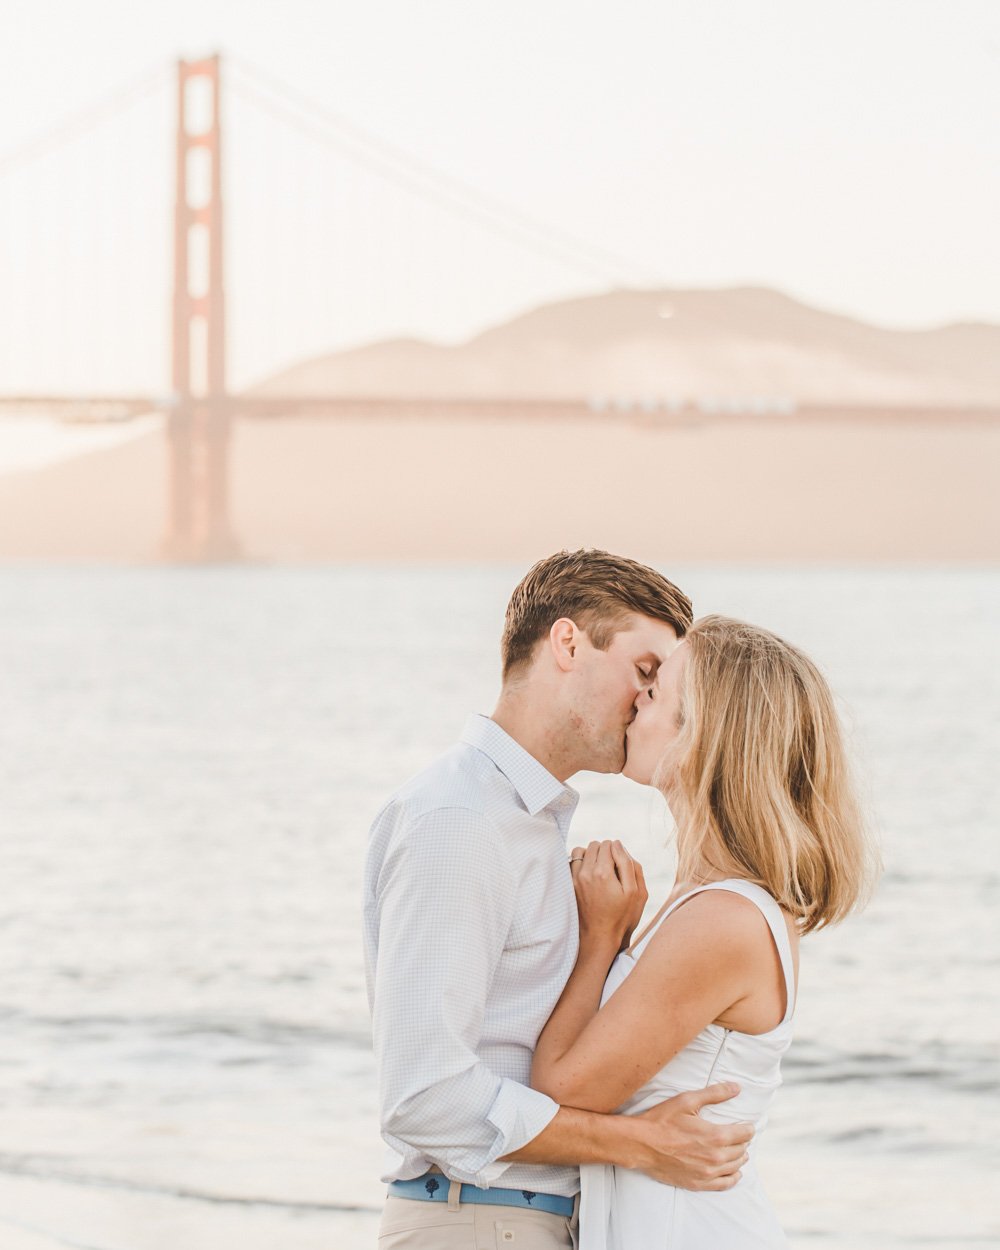 11 Amazing Bay Area Locations for Engagement Photos 